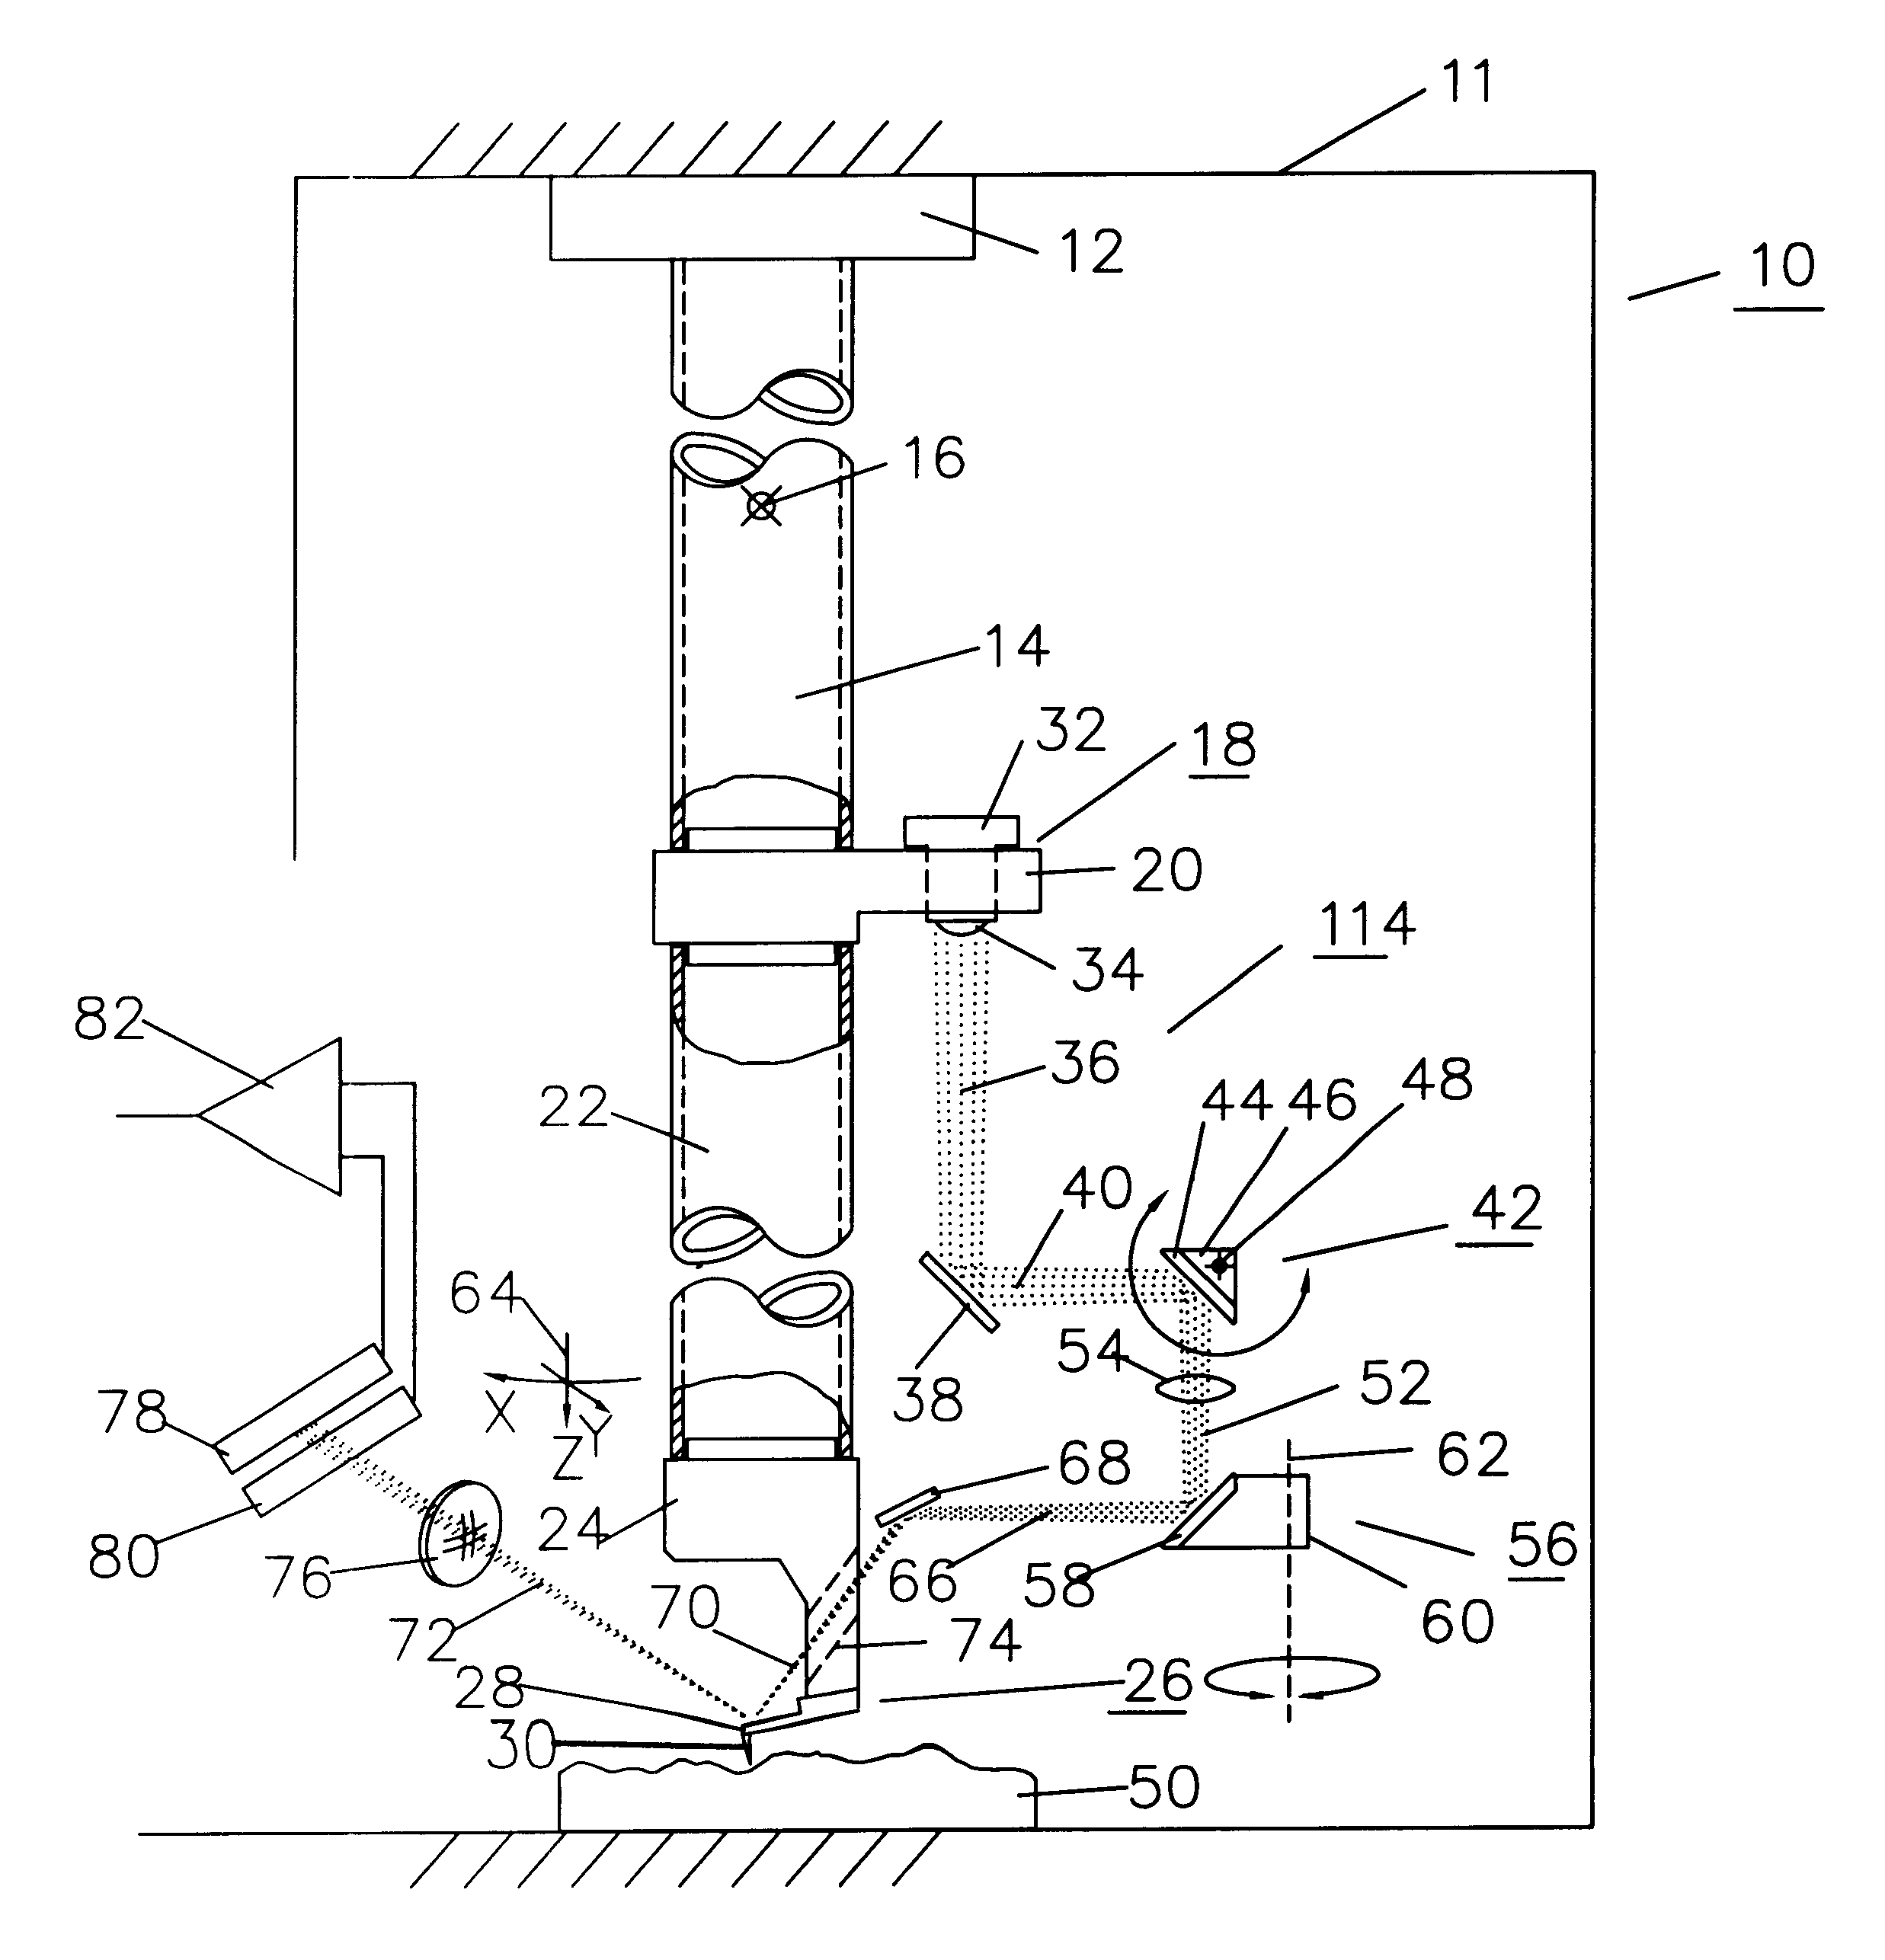 Scanning force microscope and method for beam detection and alignment